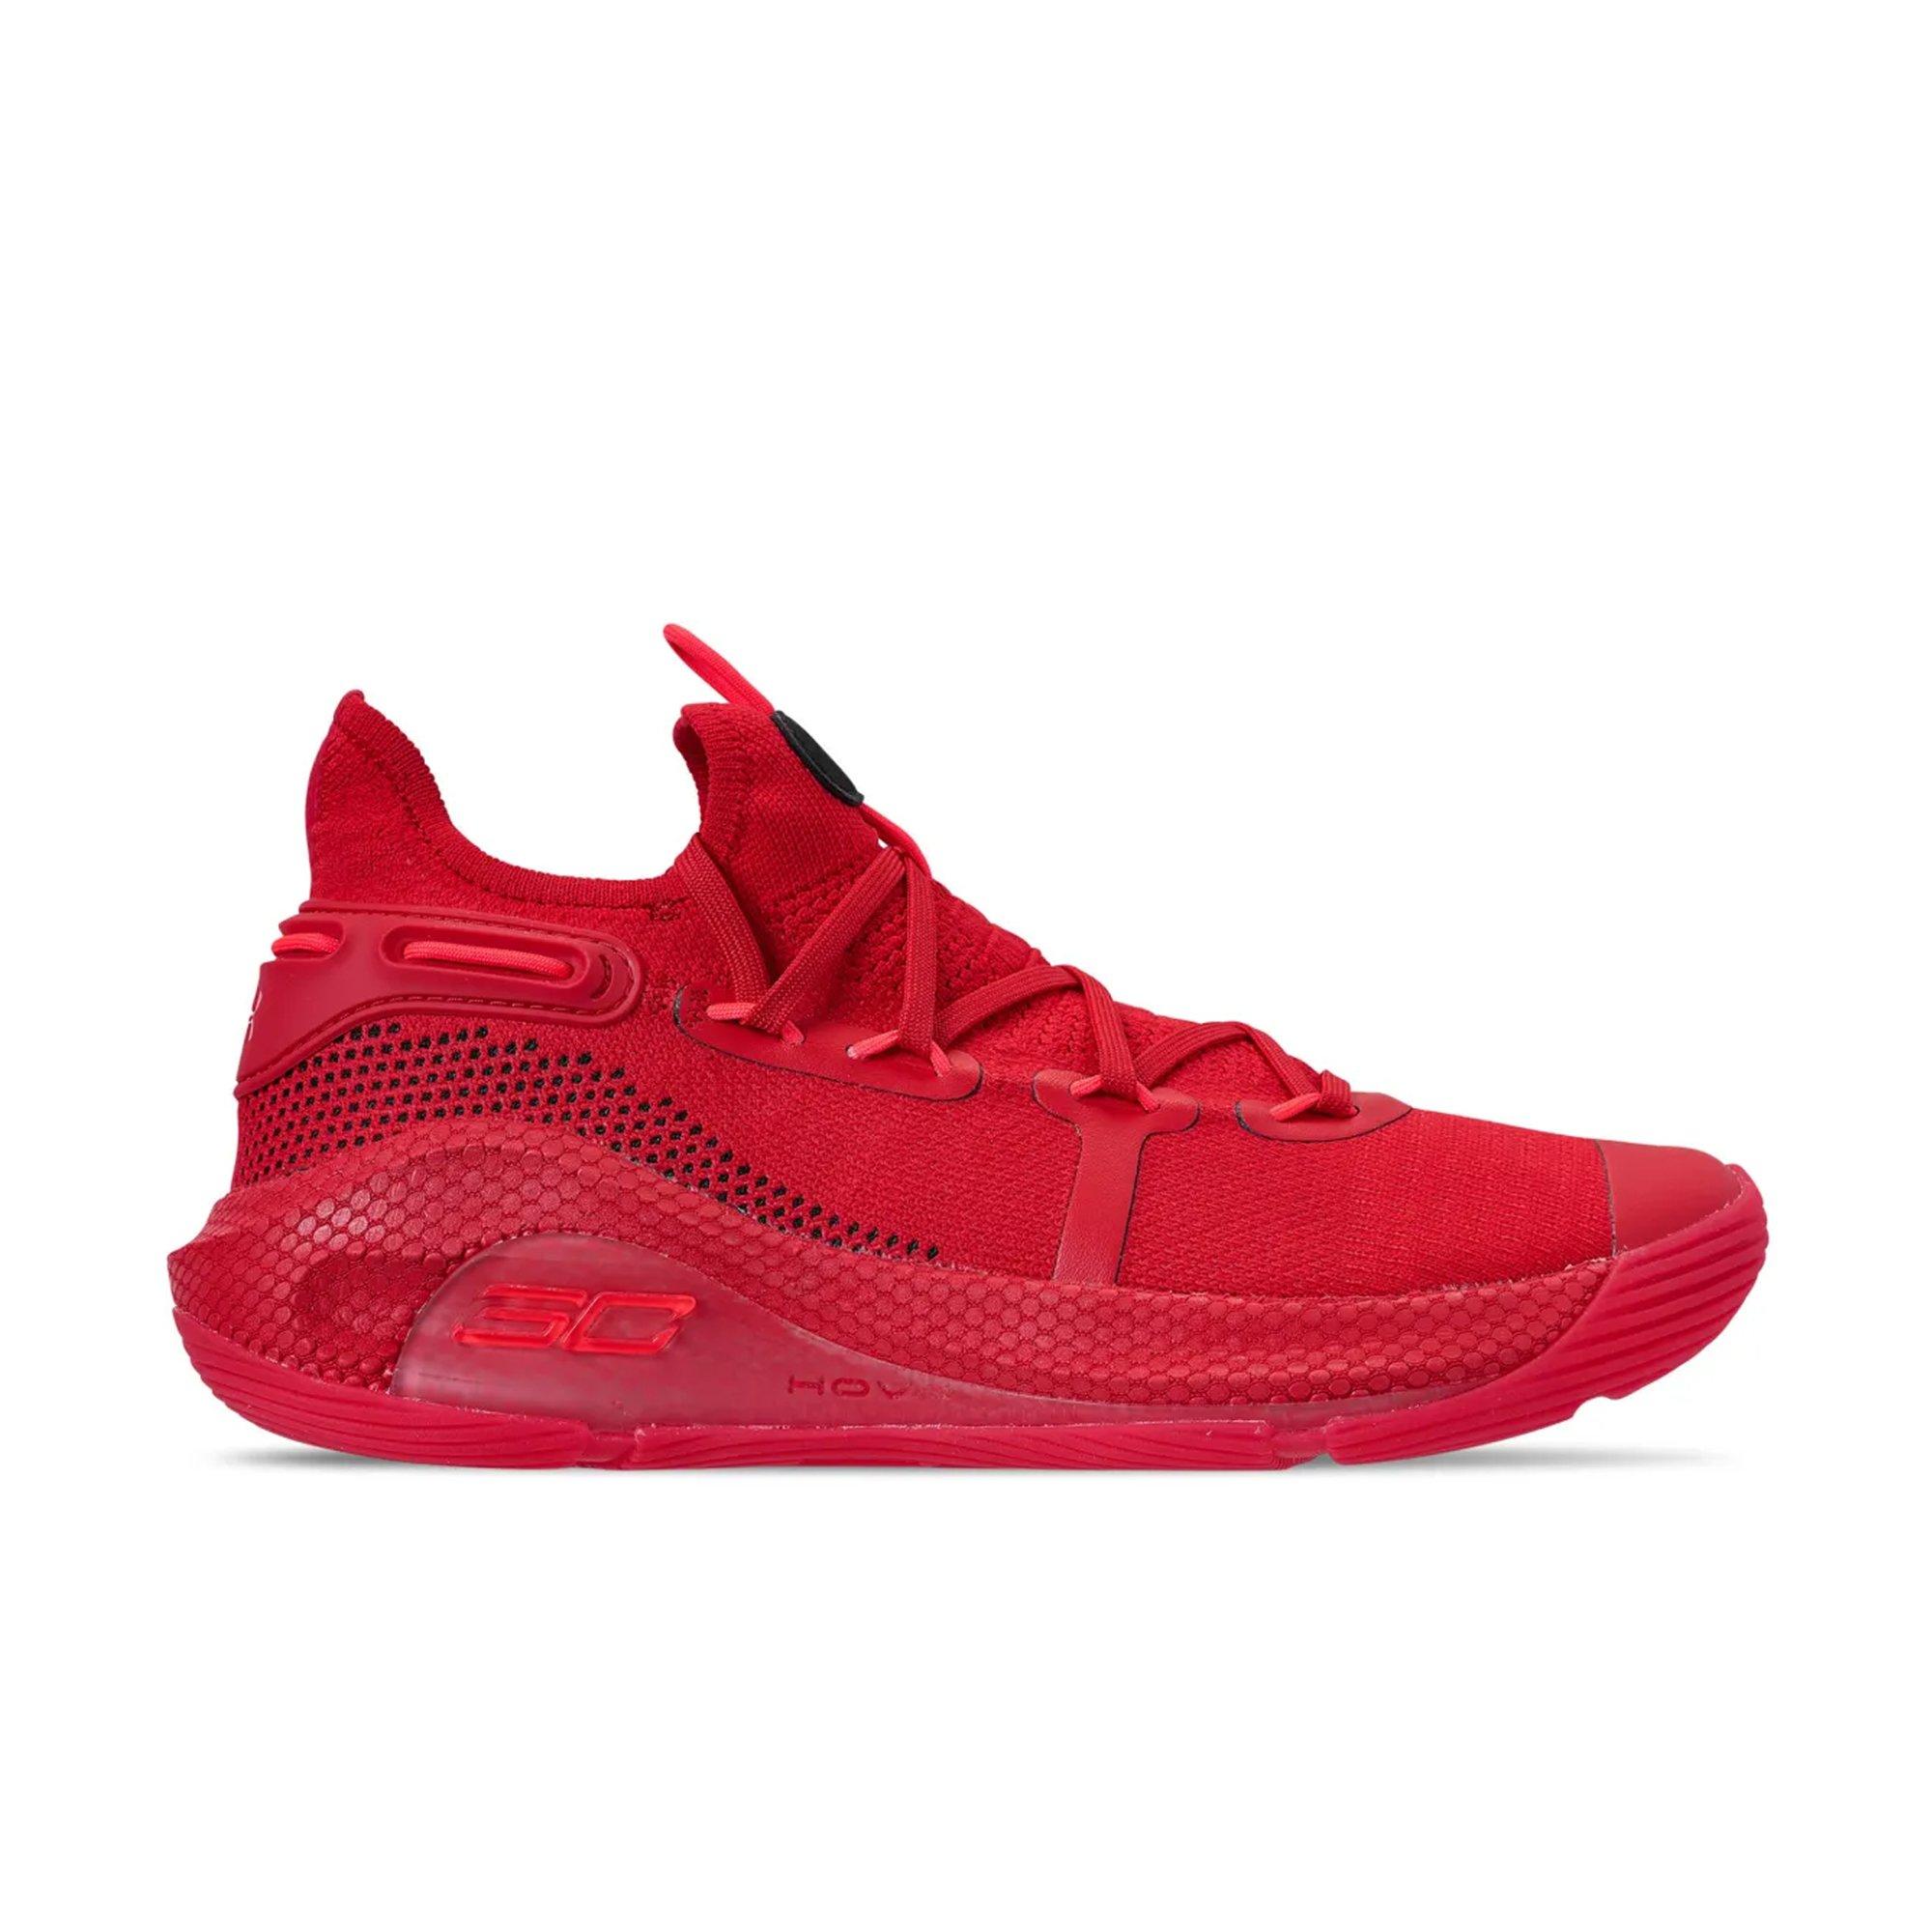 red curry 5 shoes